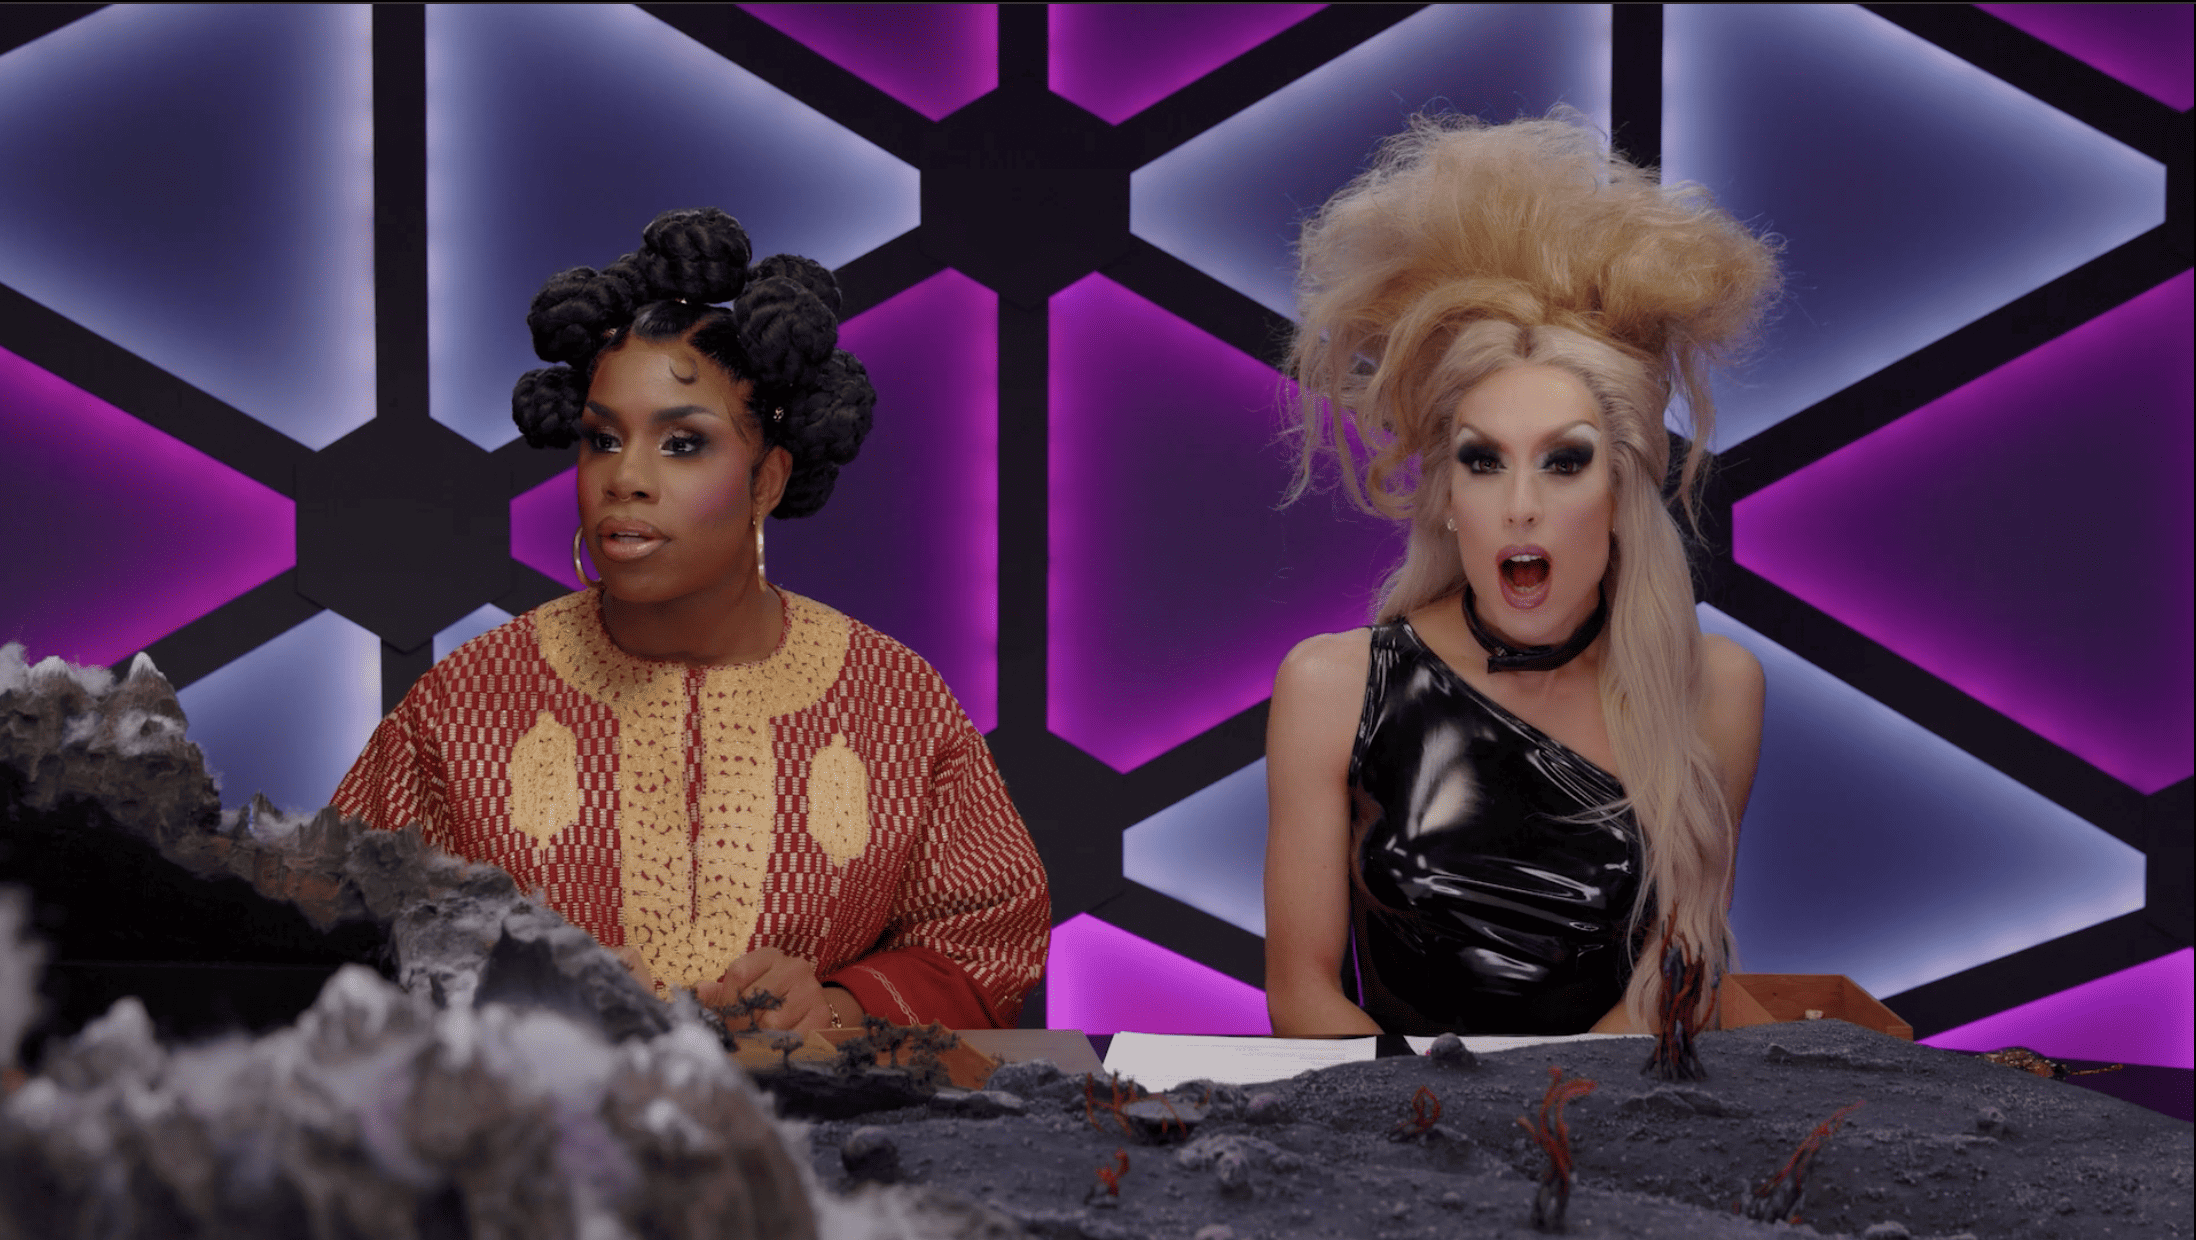 Two drag queens sit next to each other in this image from Dropout